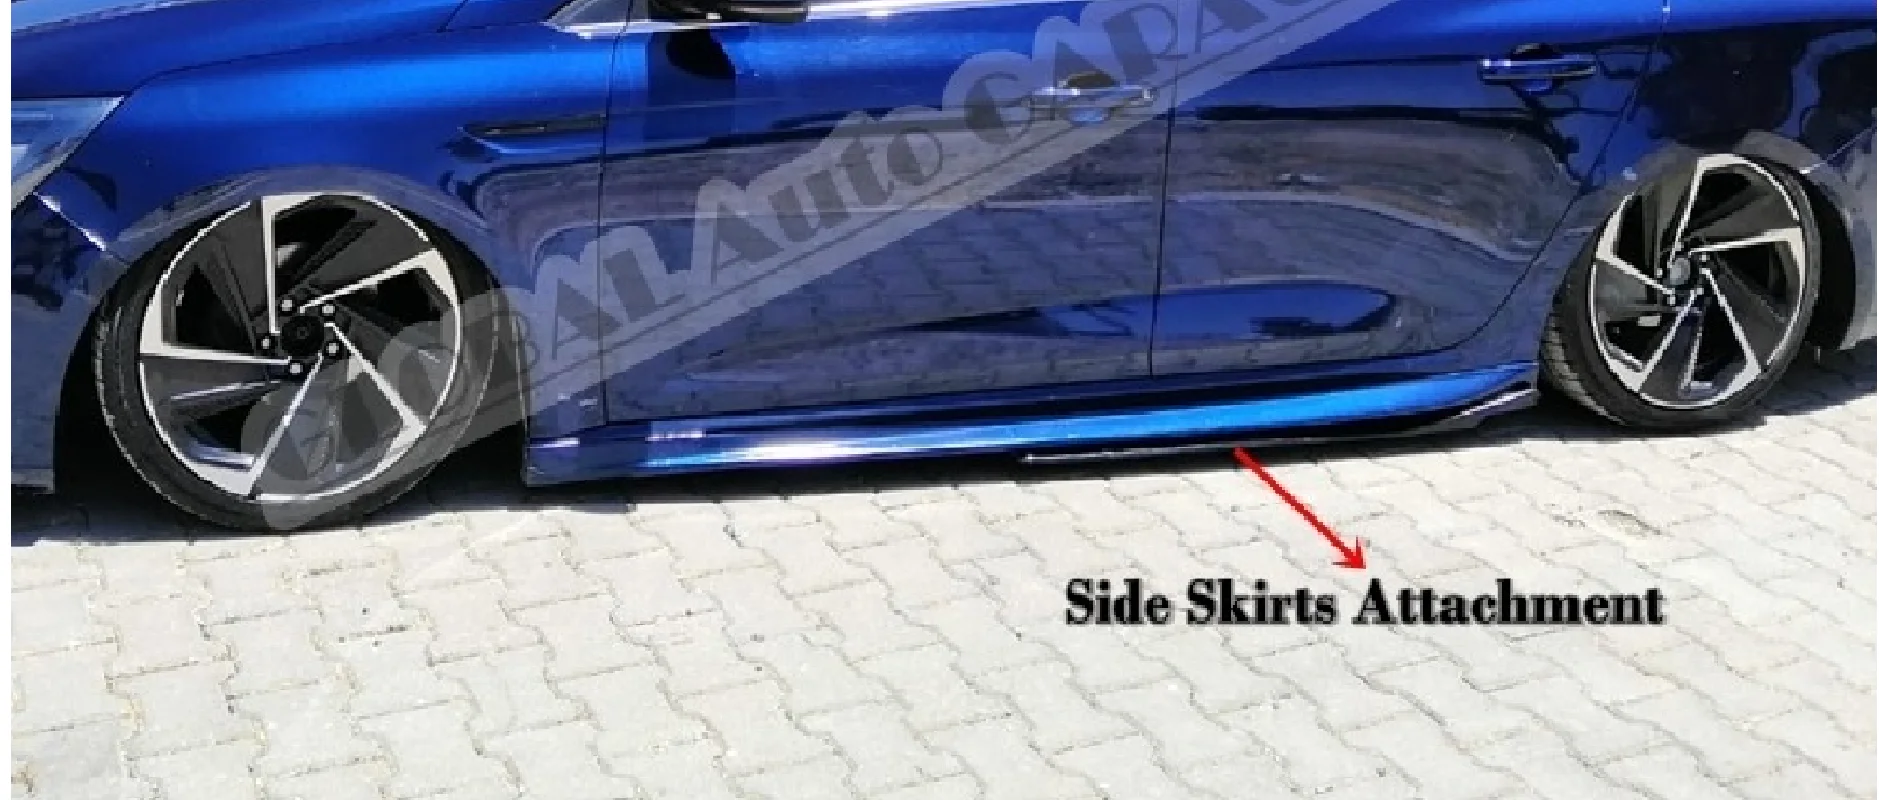 

For Fiat Linea Short Side Skirts Attachment 2008-2021 Sill Trim Car Styling Auto Accessory Universal Spoiler Mud Flaps Spilitter